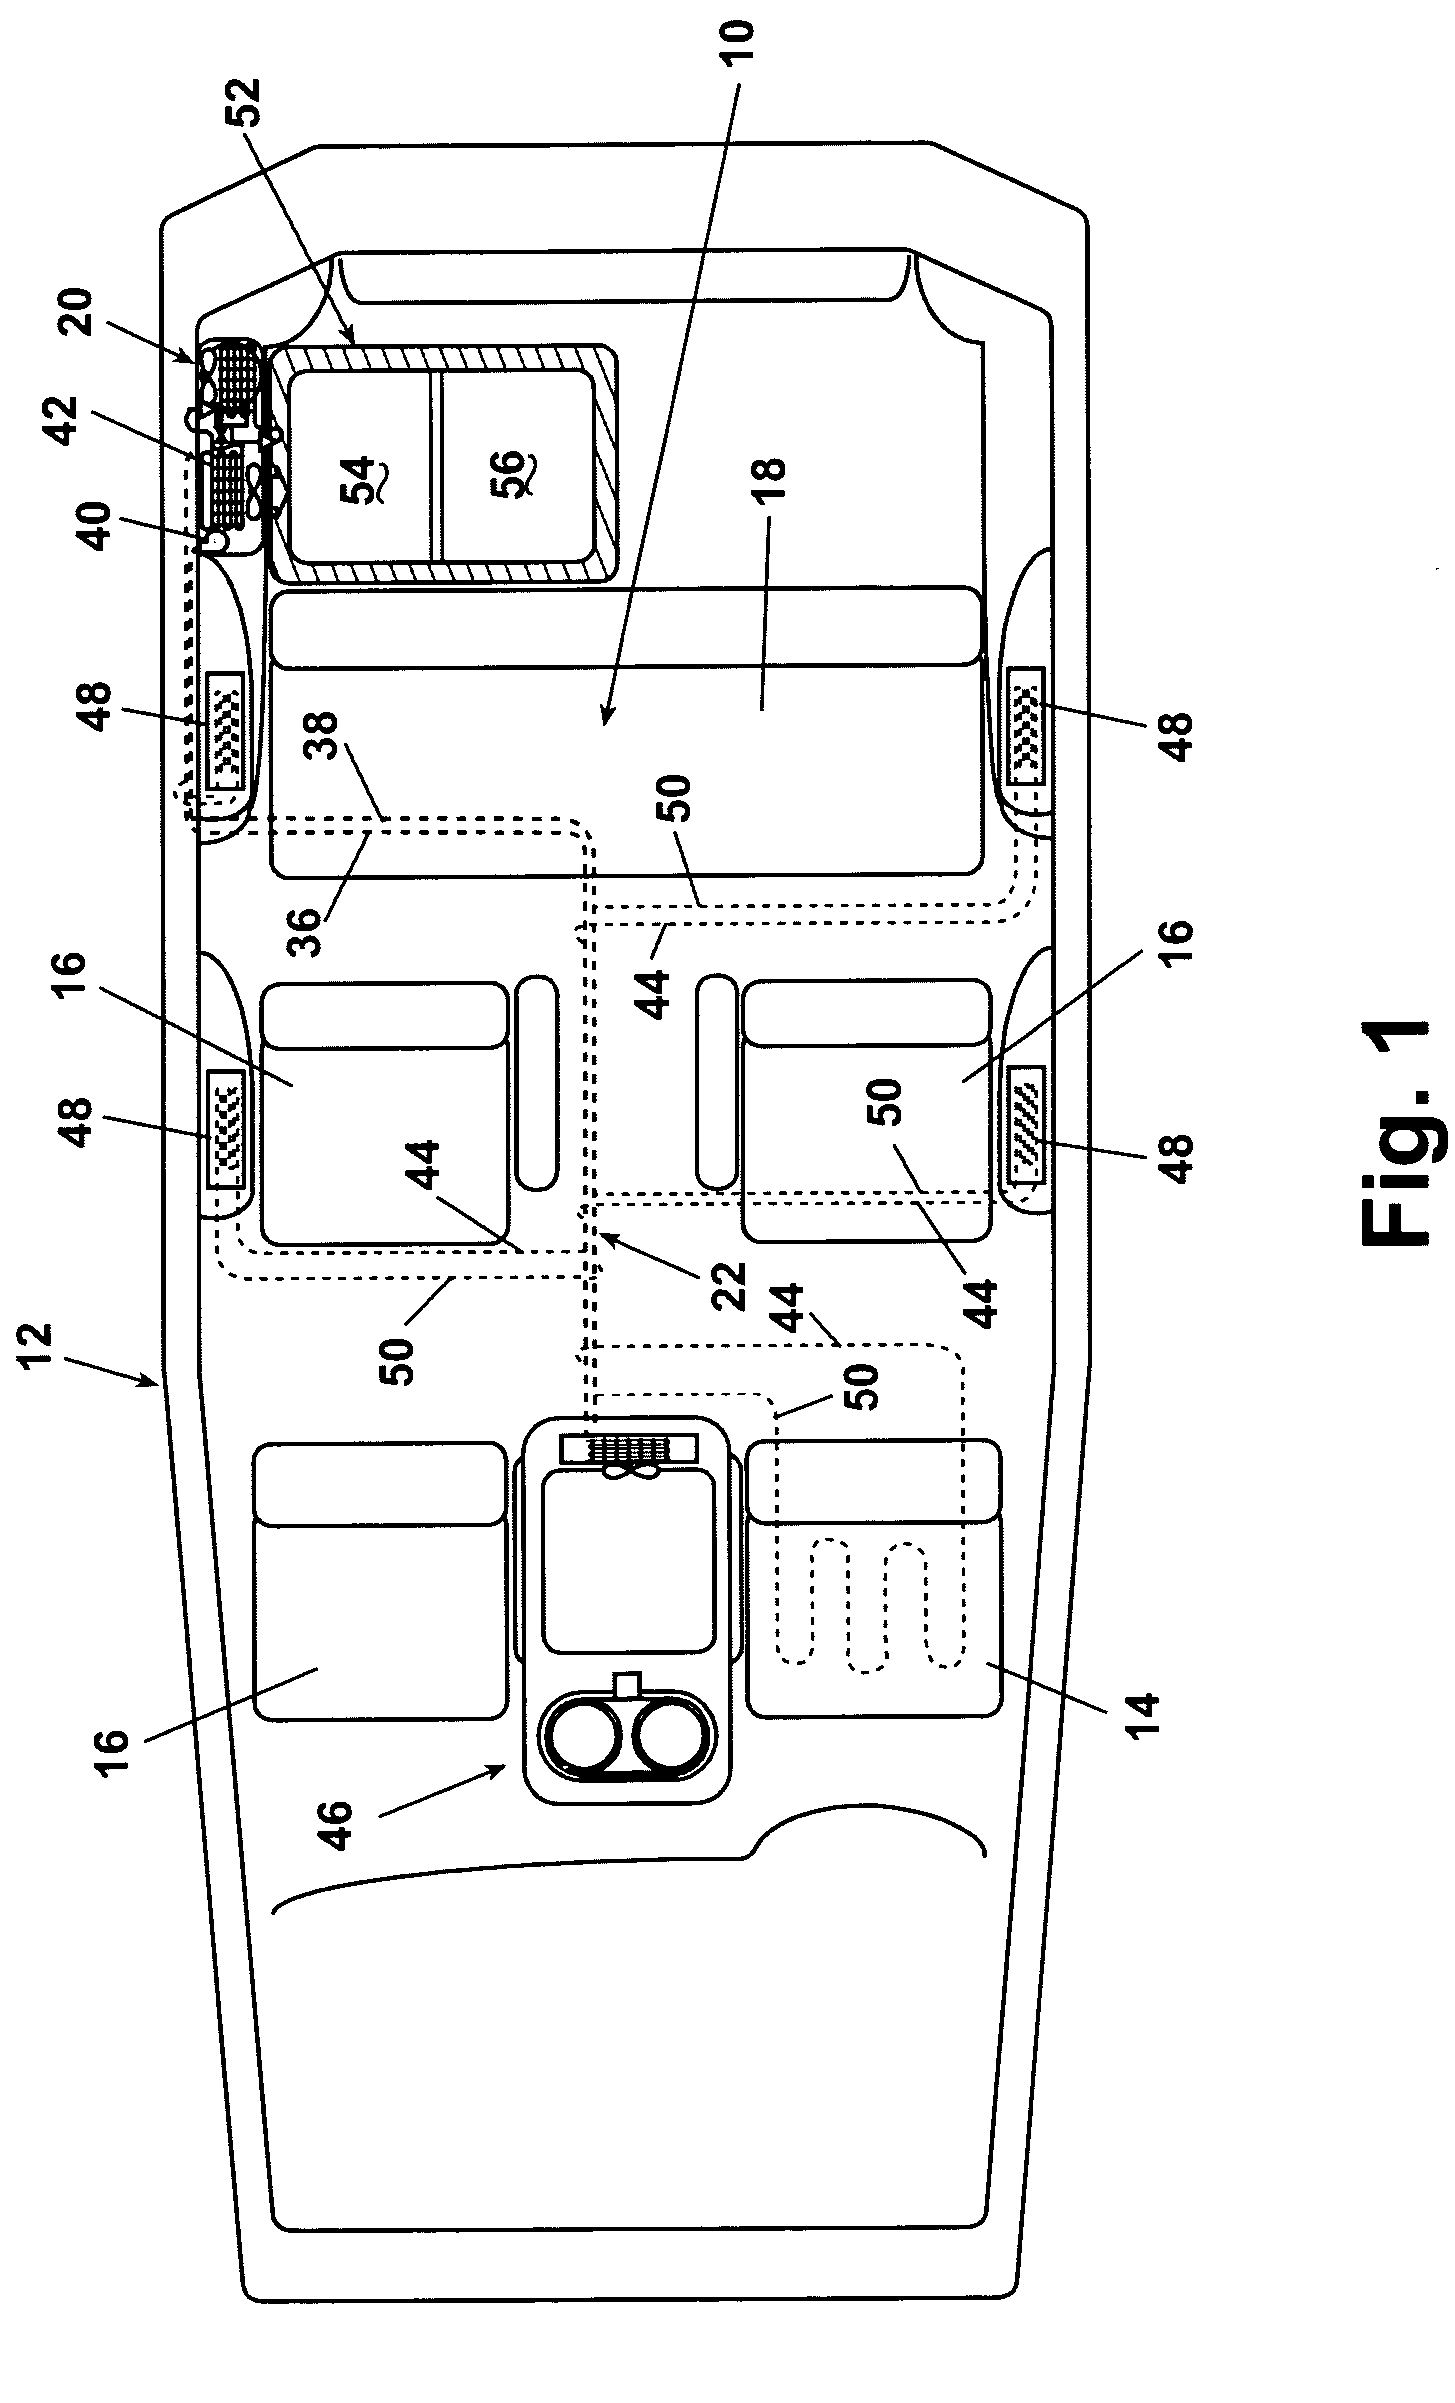 Distributed refrigeration system for a vehicle